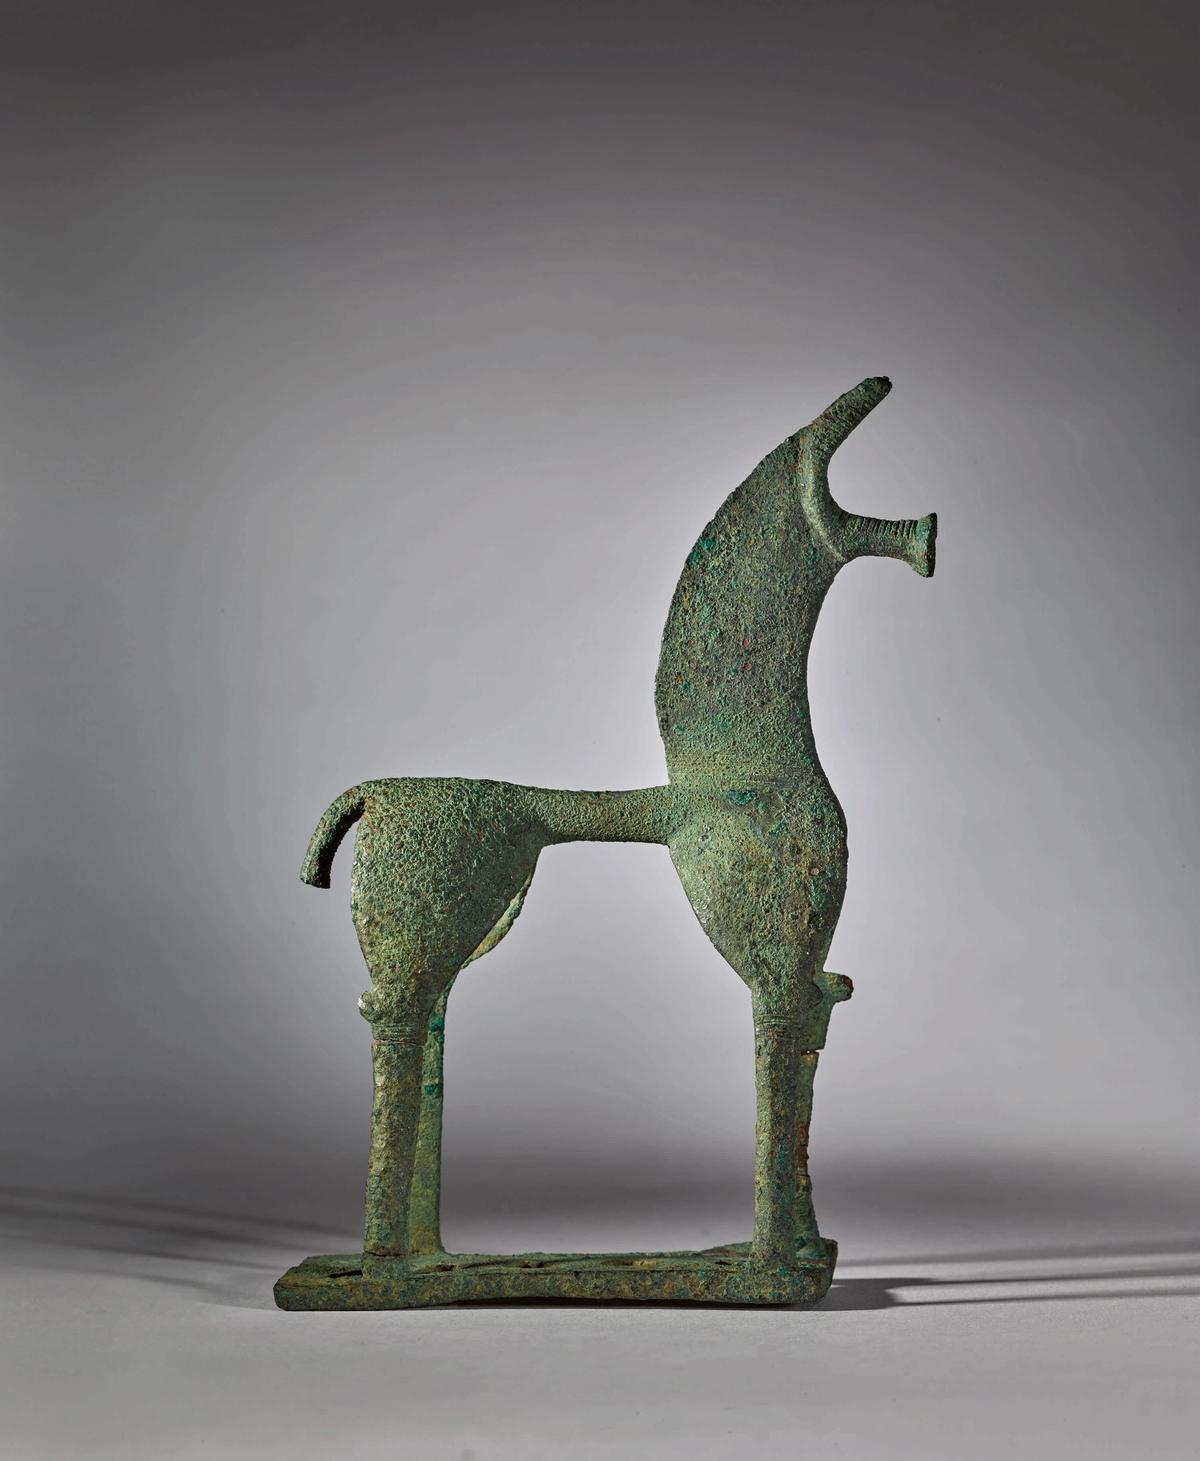 The ancient bronze horse was withdrawn from sale after Greece demanded its return, but now Sotheby's is fighting back Sotheby's